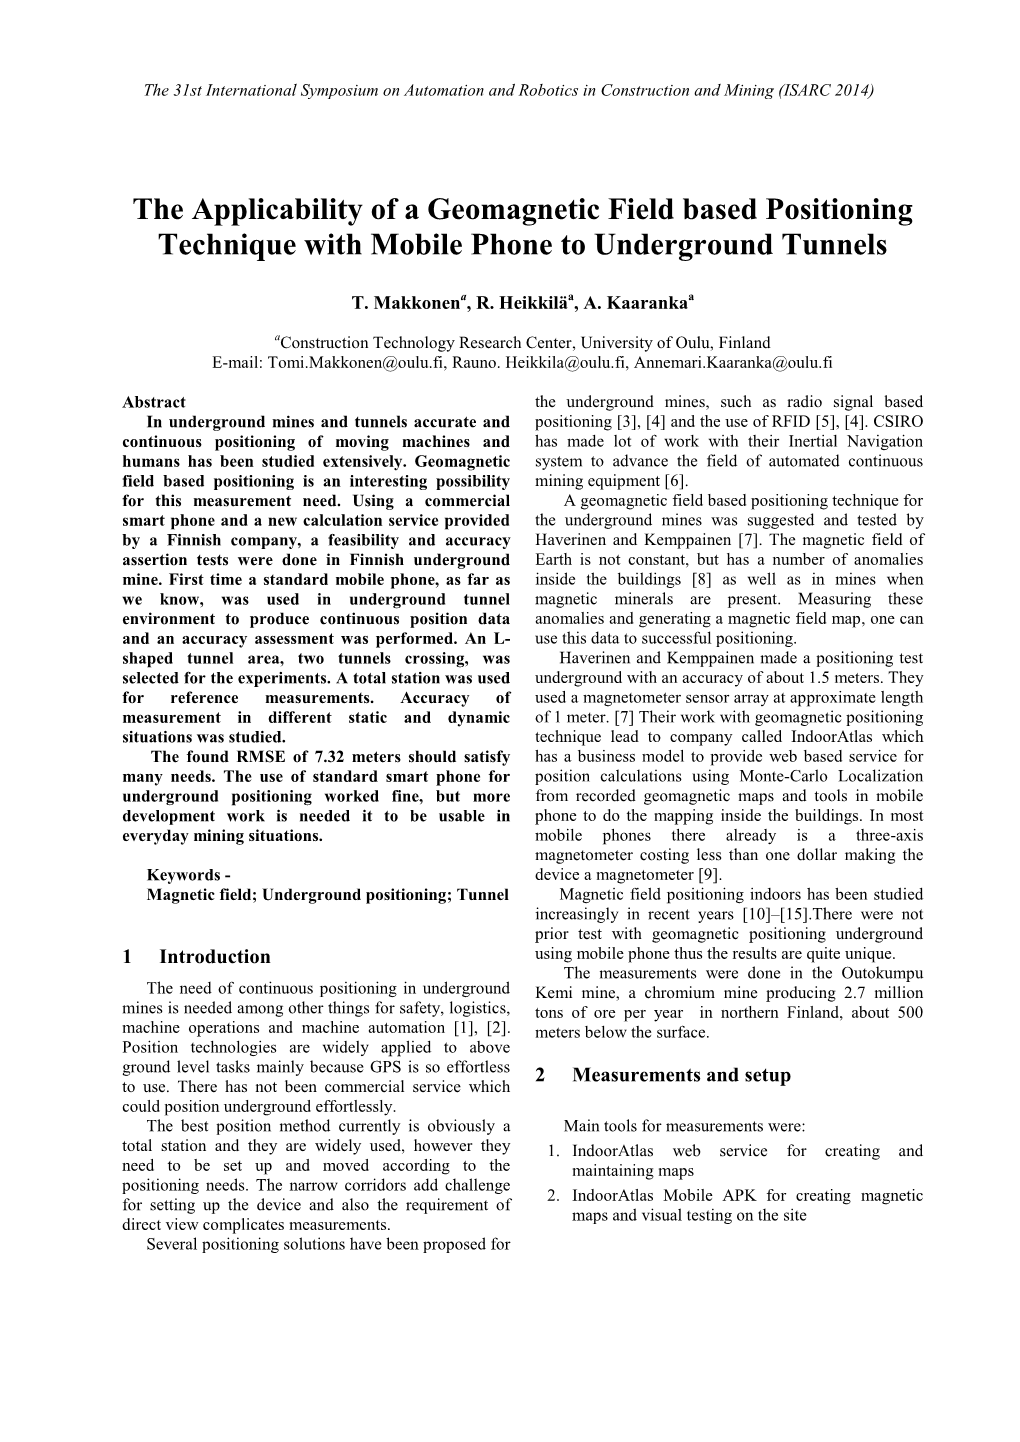 The Applicability of a Geomagnetic Field Based Positioning Technique with Mobile Phone to Underground Tunnels